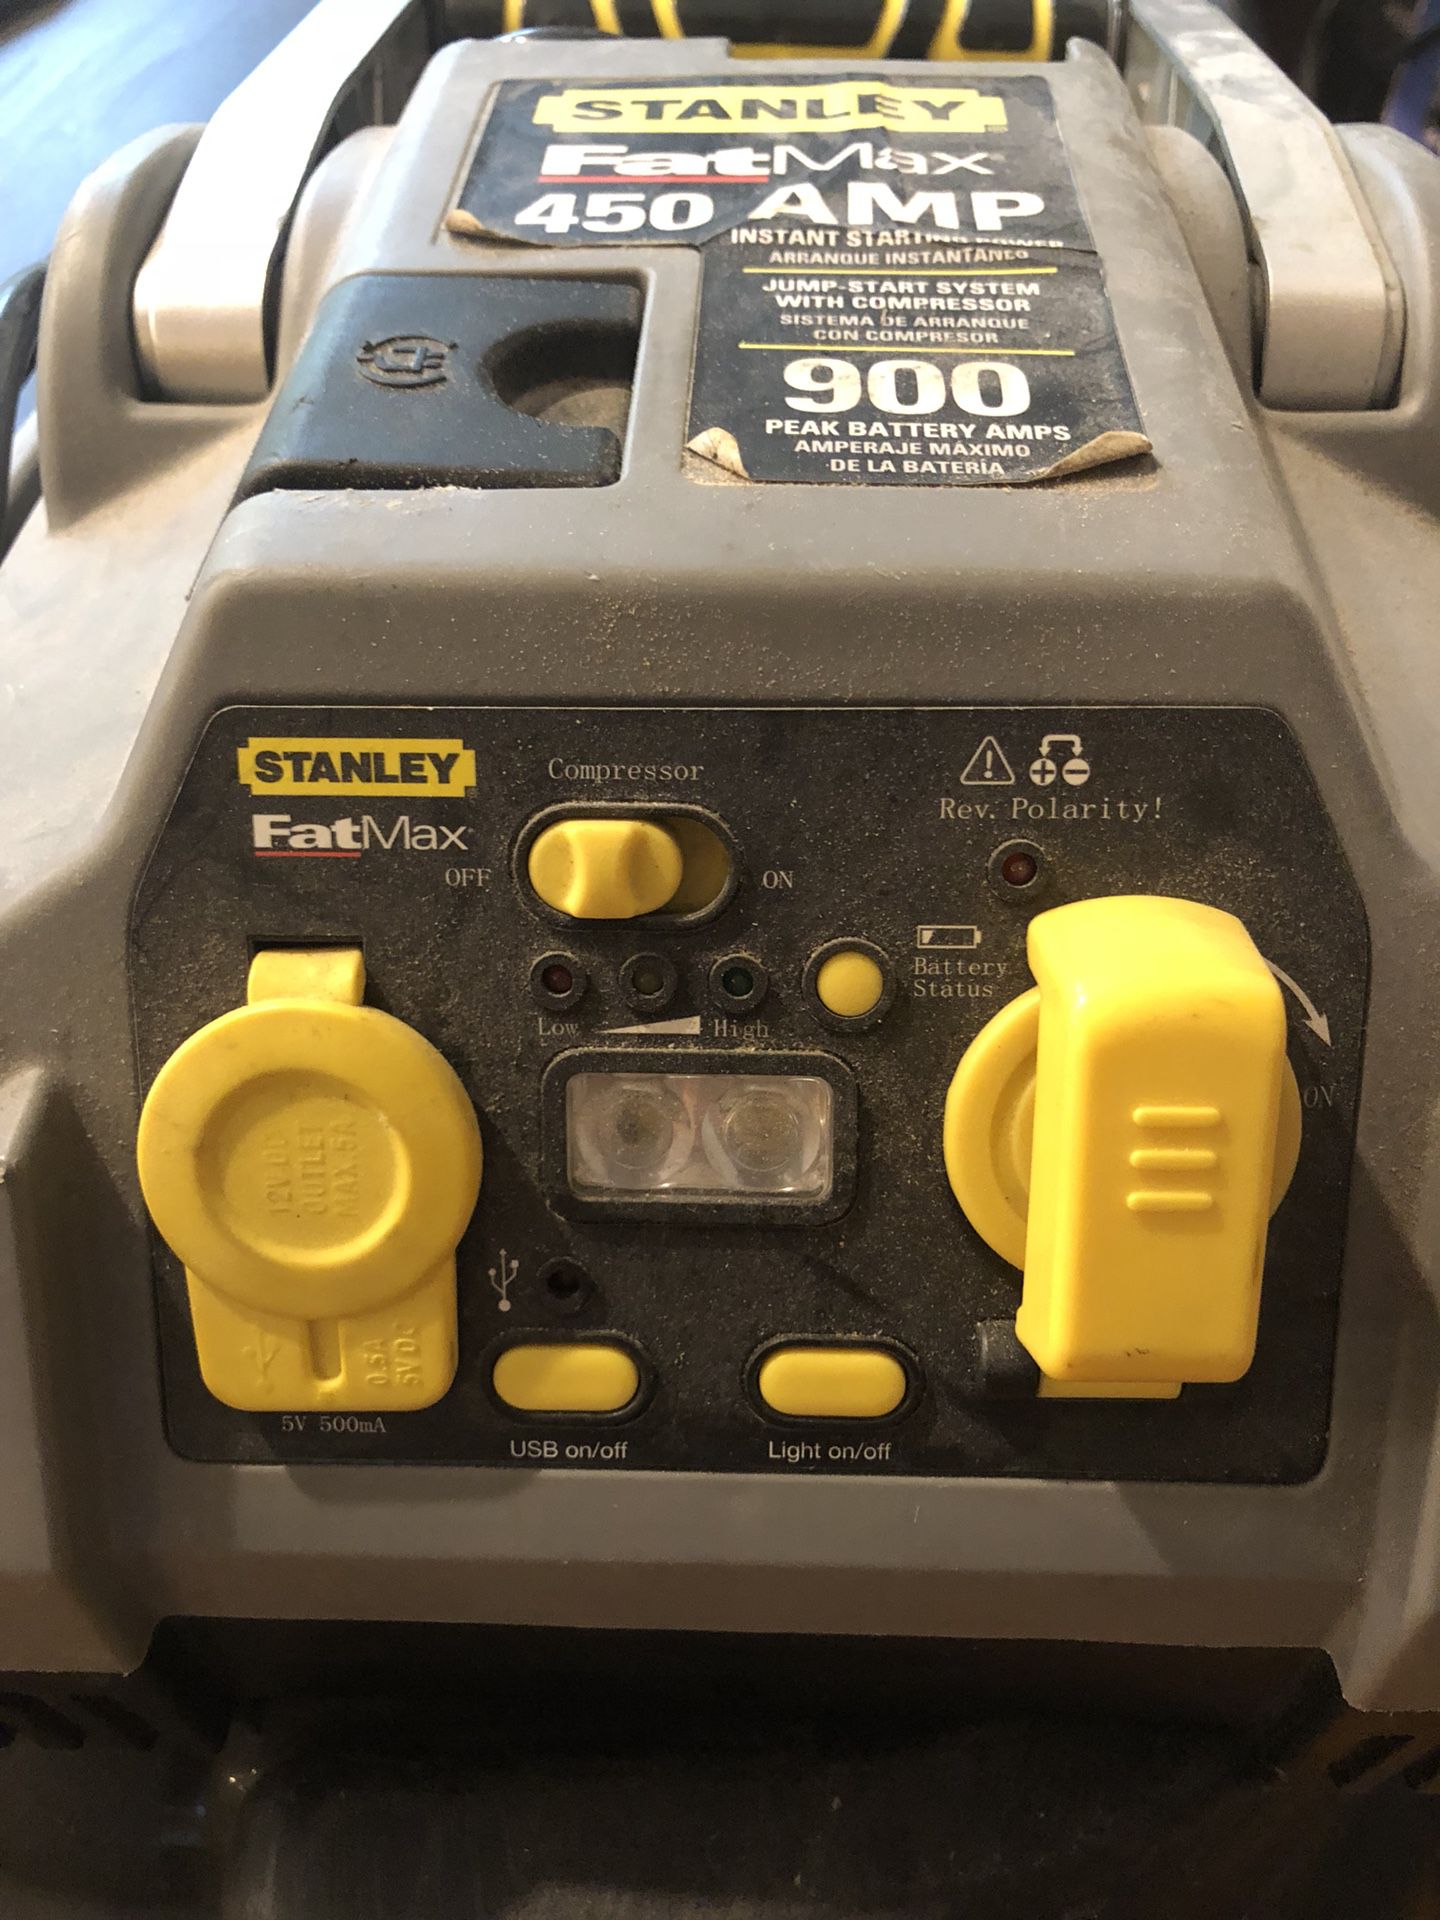 Stanley FatMax 450 AMP Jump-Start with Compressor for Sale in North  Reading, MA - OfferUp